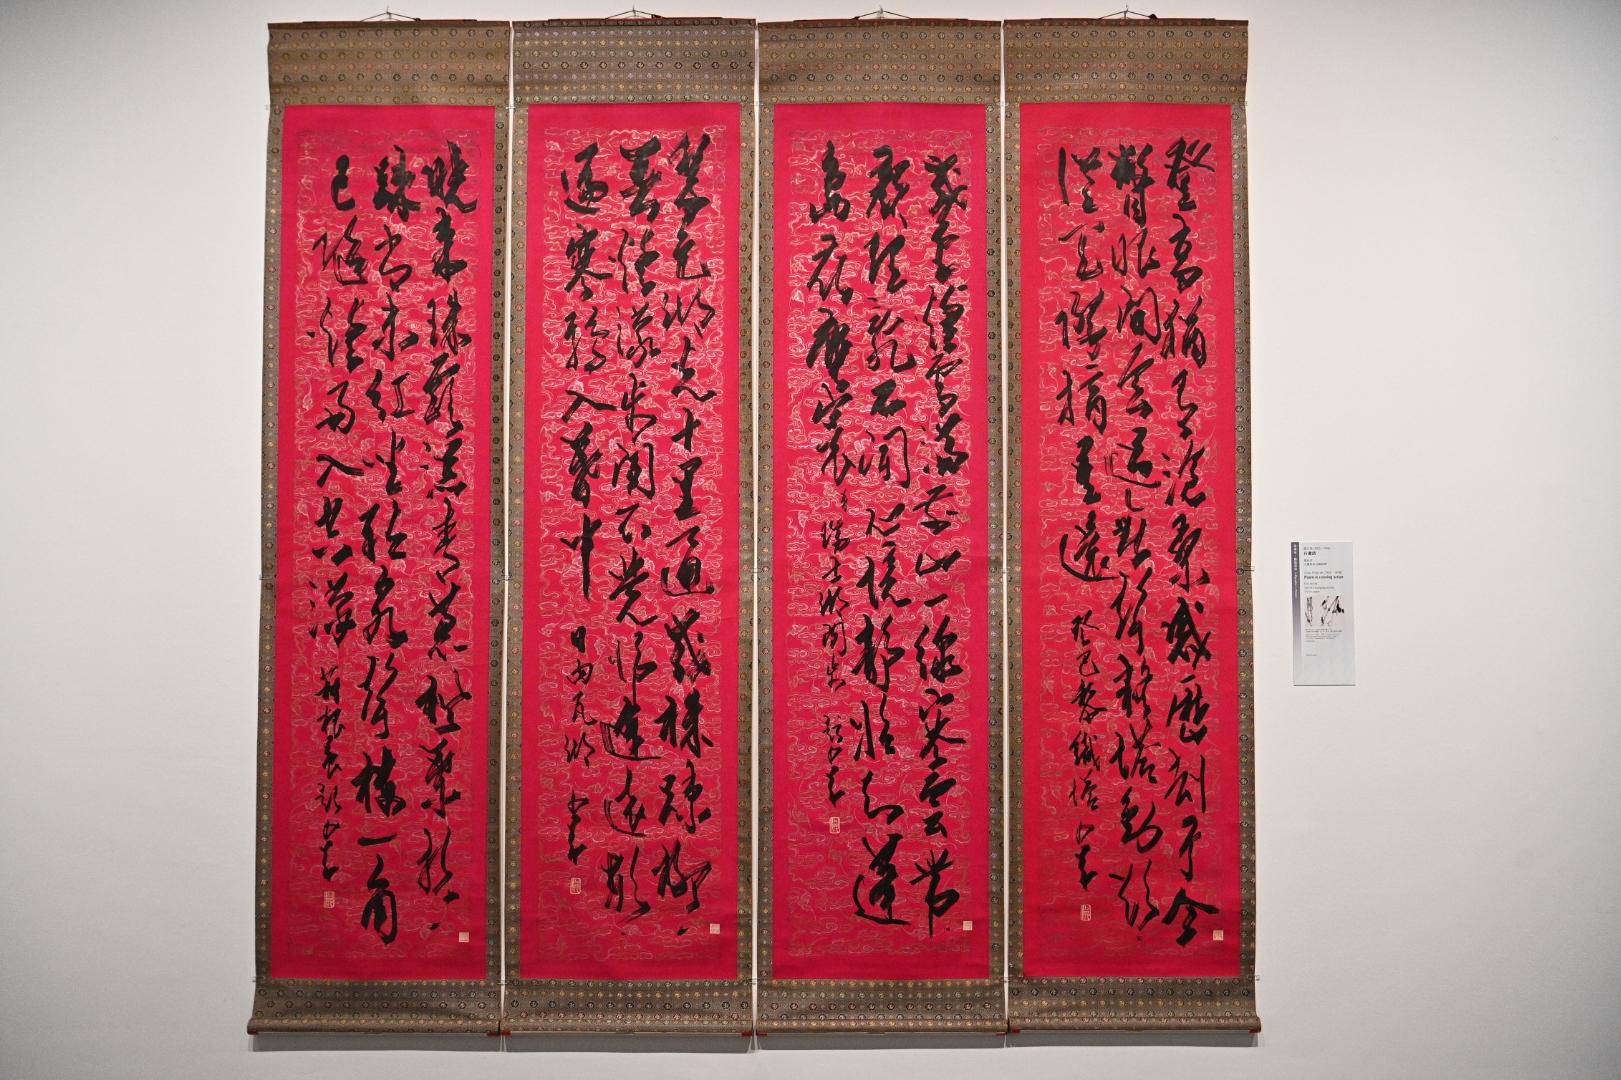 The "City Rhymes: The Melodious Notes of Calligraphy" exhibition will be held from tomorrow (July 22) at the Hong Kong Museum of Art. Photo shows Chao Shao-an's "Poem in running script".